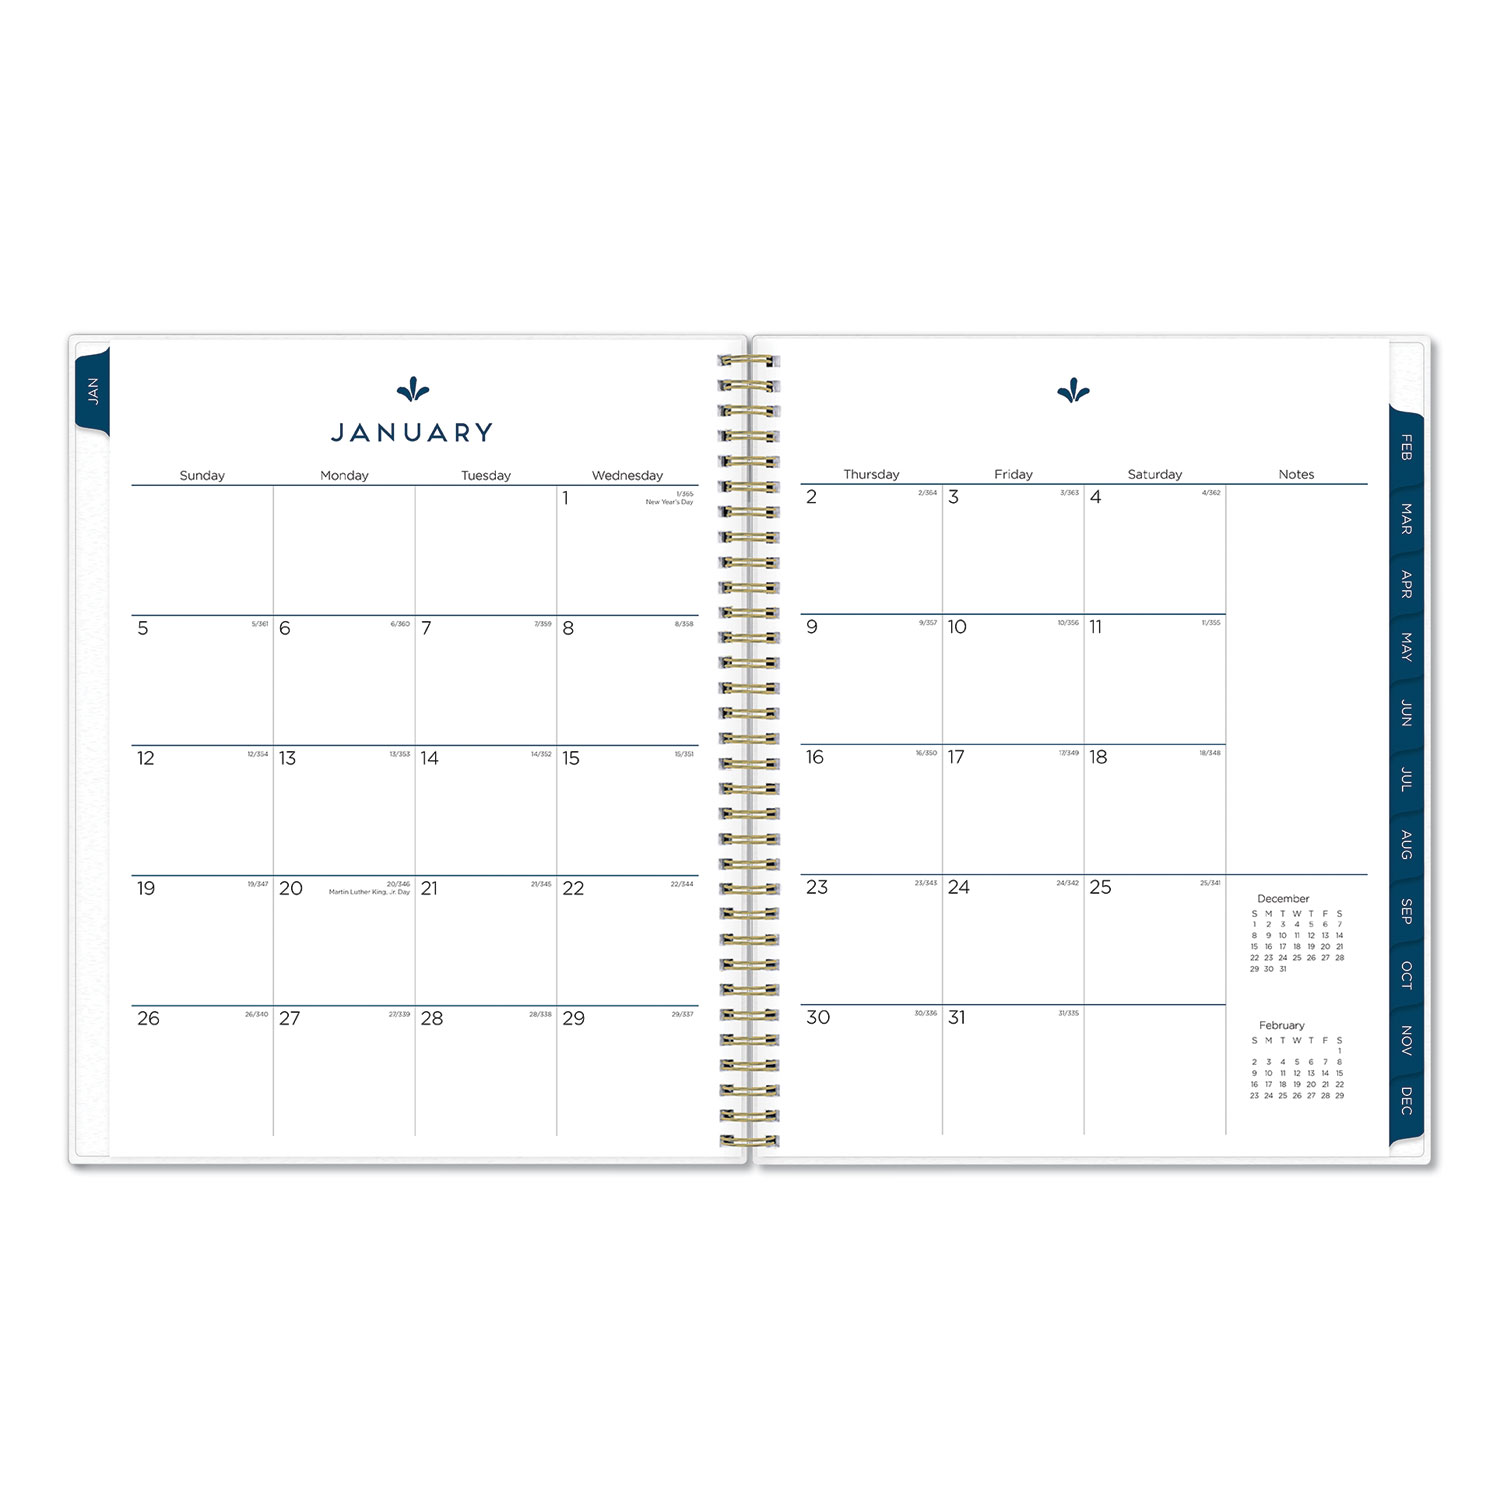 Sullana Weekly/Monthly Planner, 11 x 8 1/2, Teal Cover, 2020